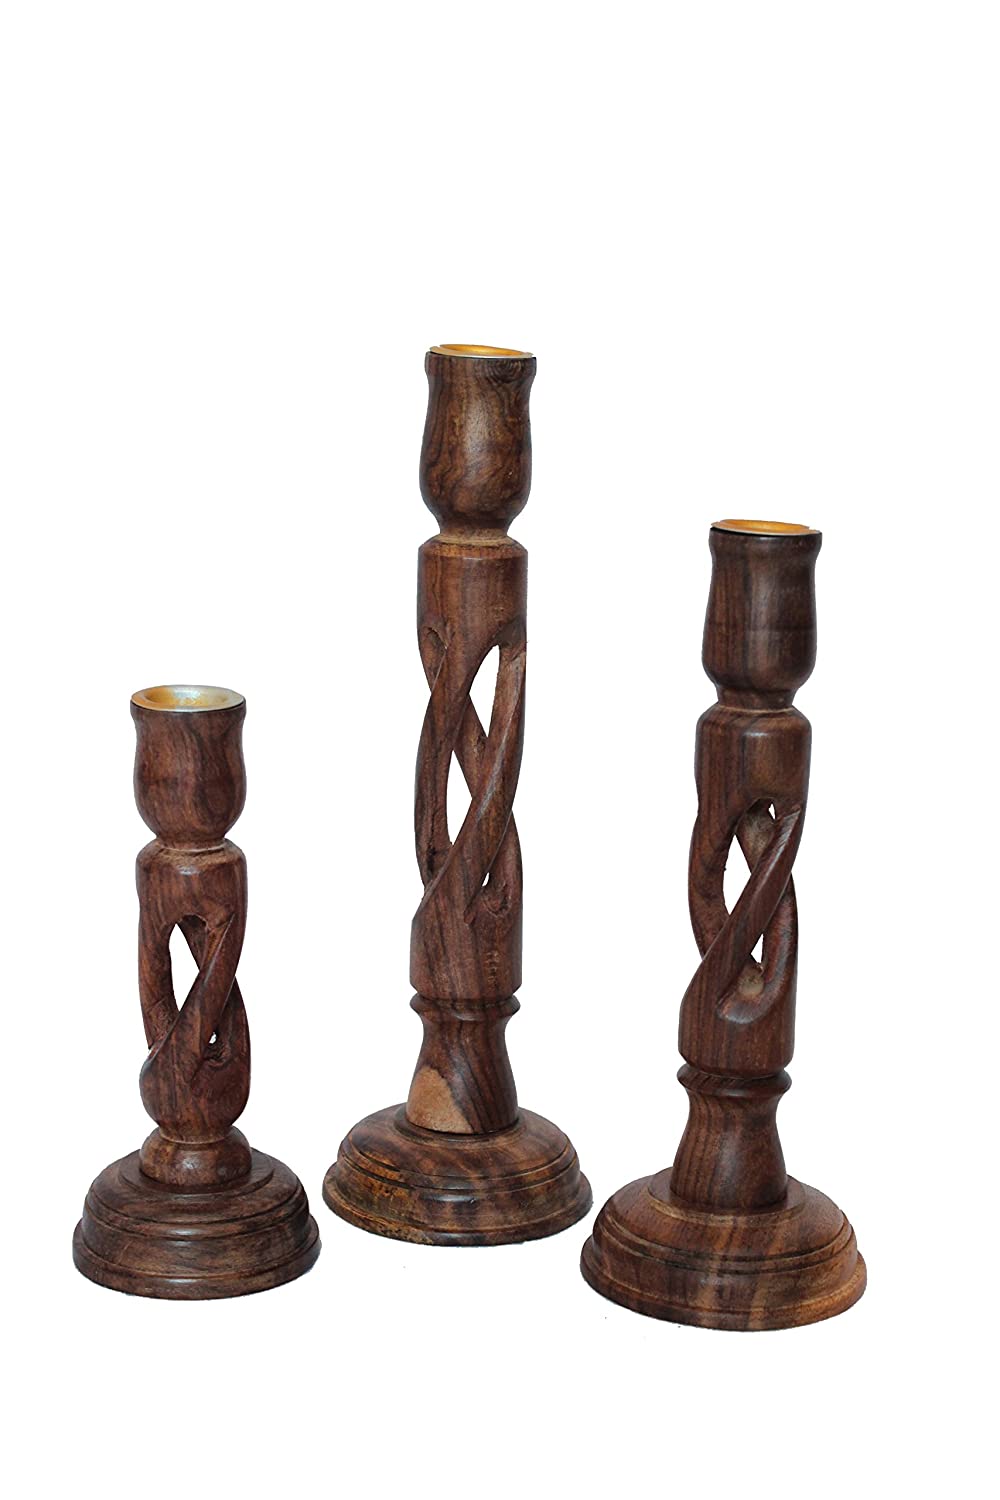 Wooden Pillar Candle Stand Candle Holders for Living Room, Table Centerpiece, Tealight Holder Candle Stand for Home Decoration Dime Store